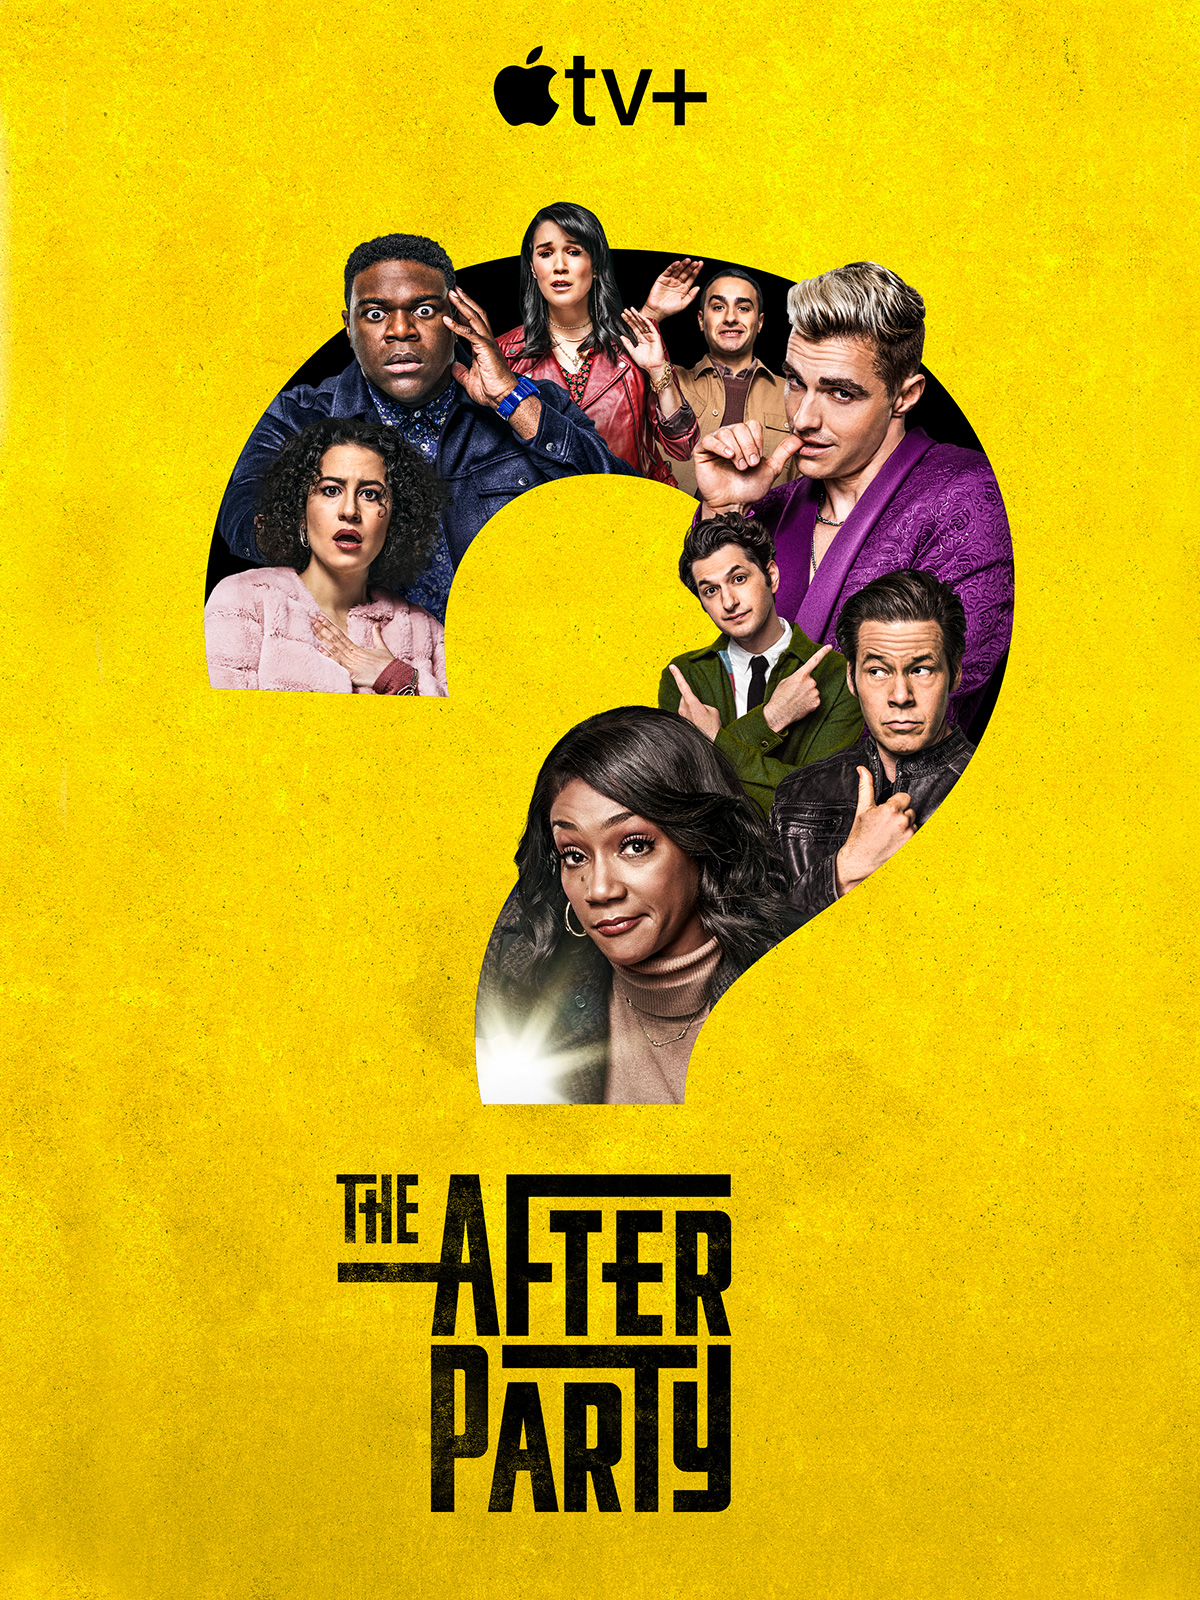 The Afterparty - Season 1